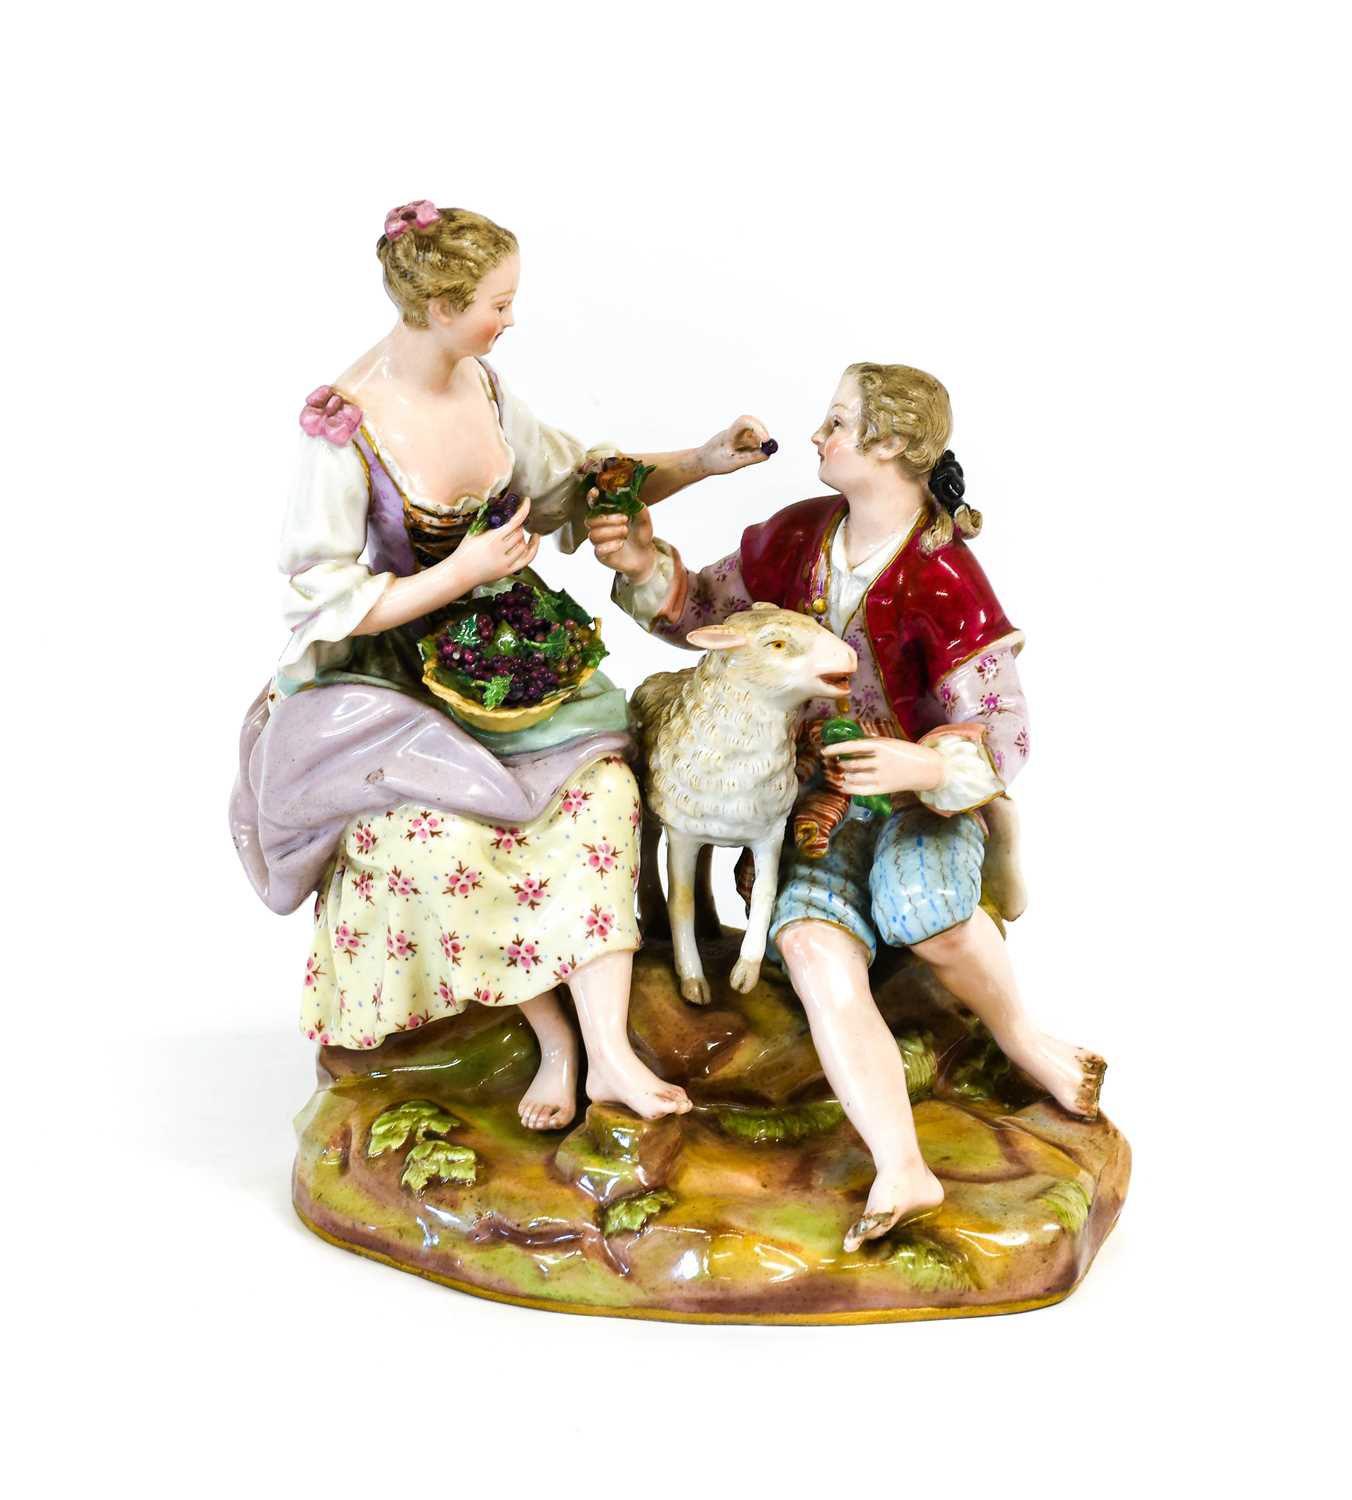 A Meissen Porcelain Figure Group of a Shepherd and Shepherdess with Ewe, 19th century, both seated